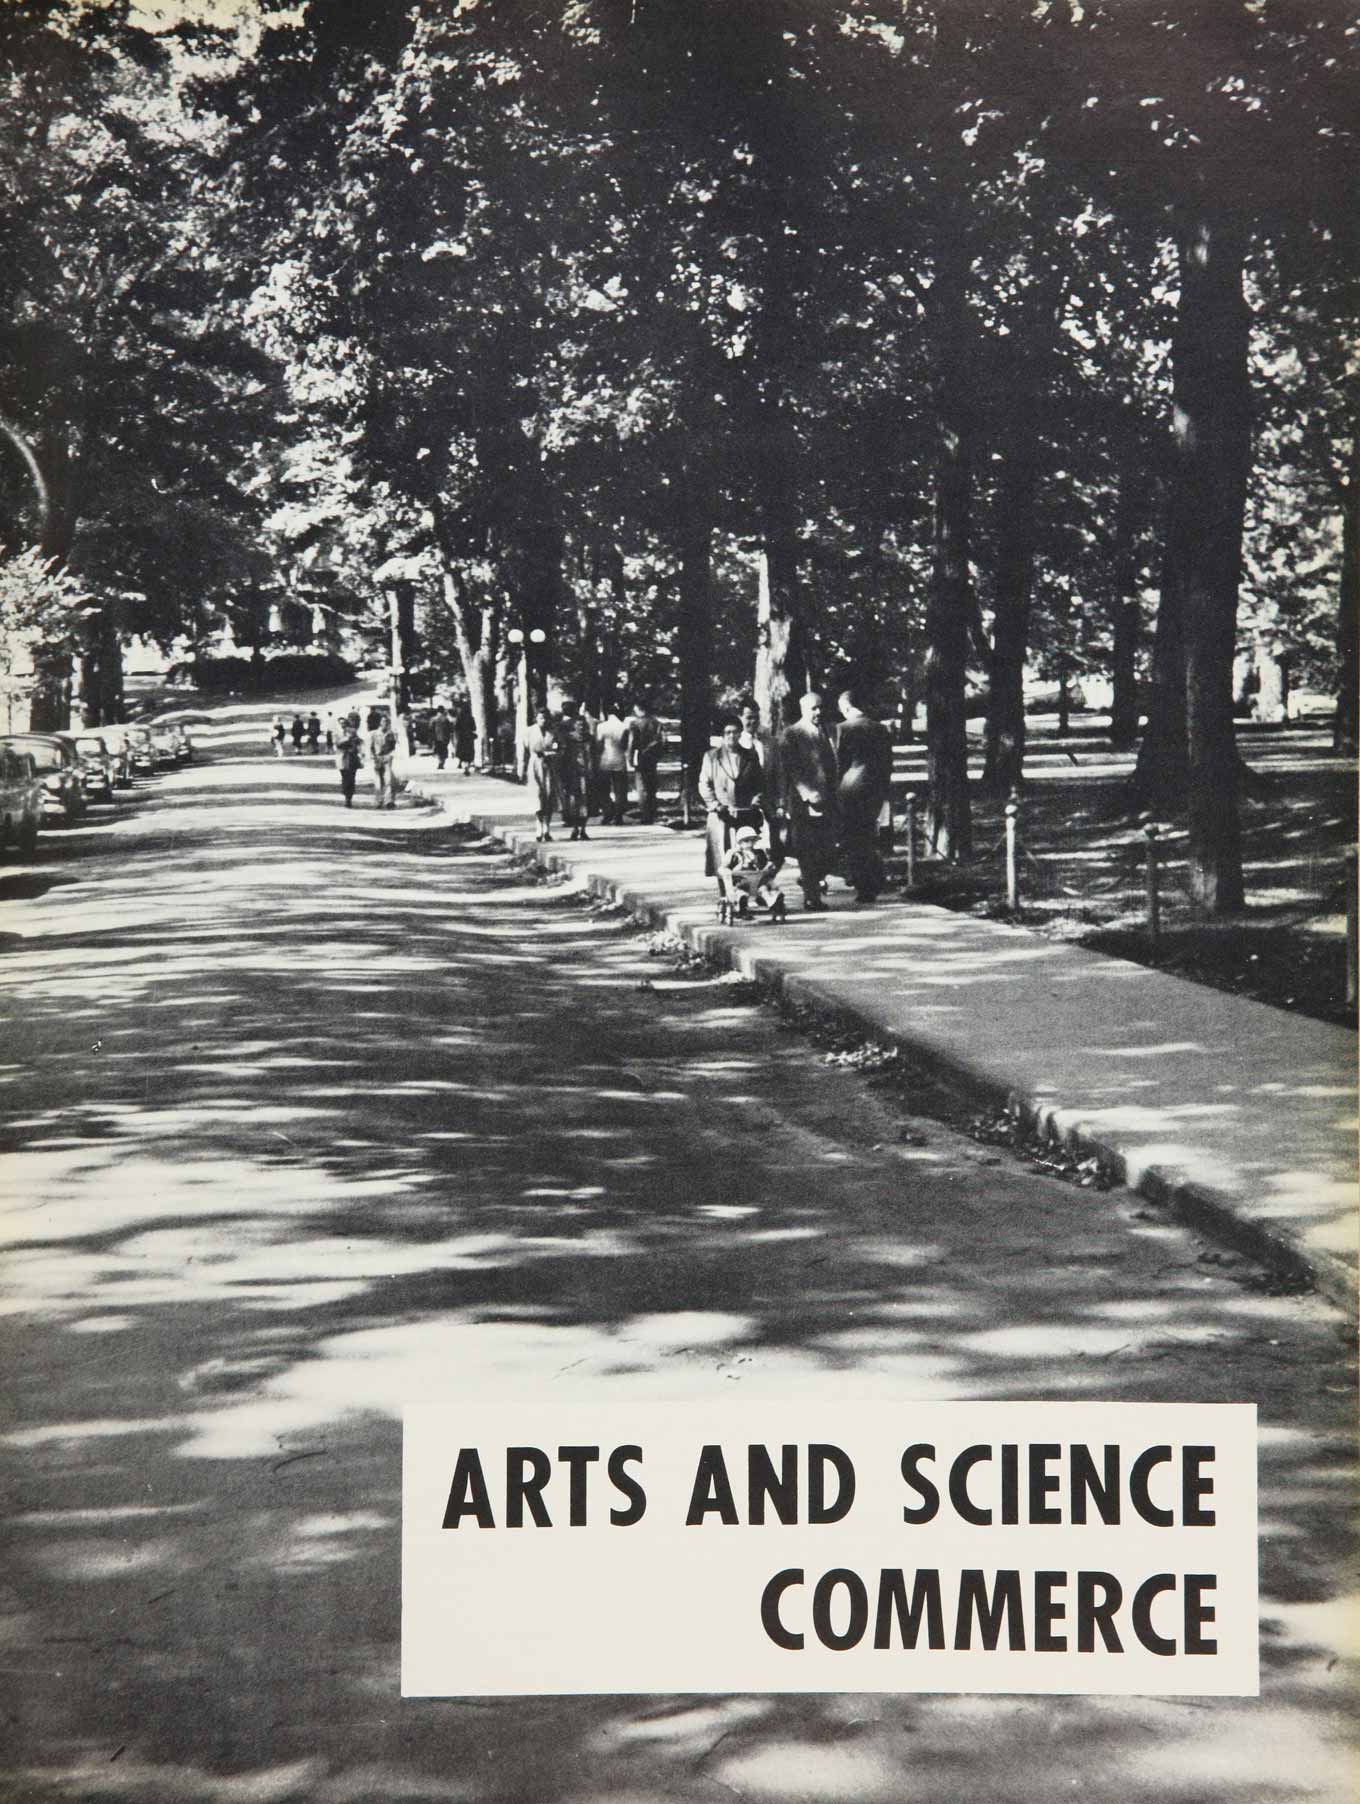 McGill Yearbook: 1955